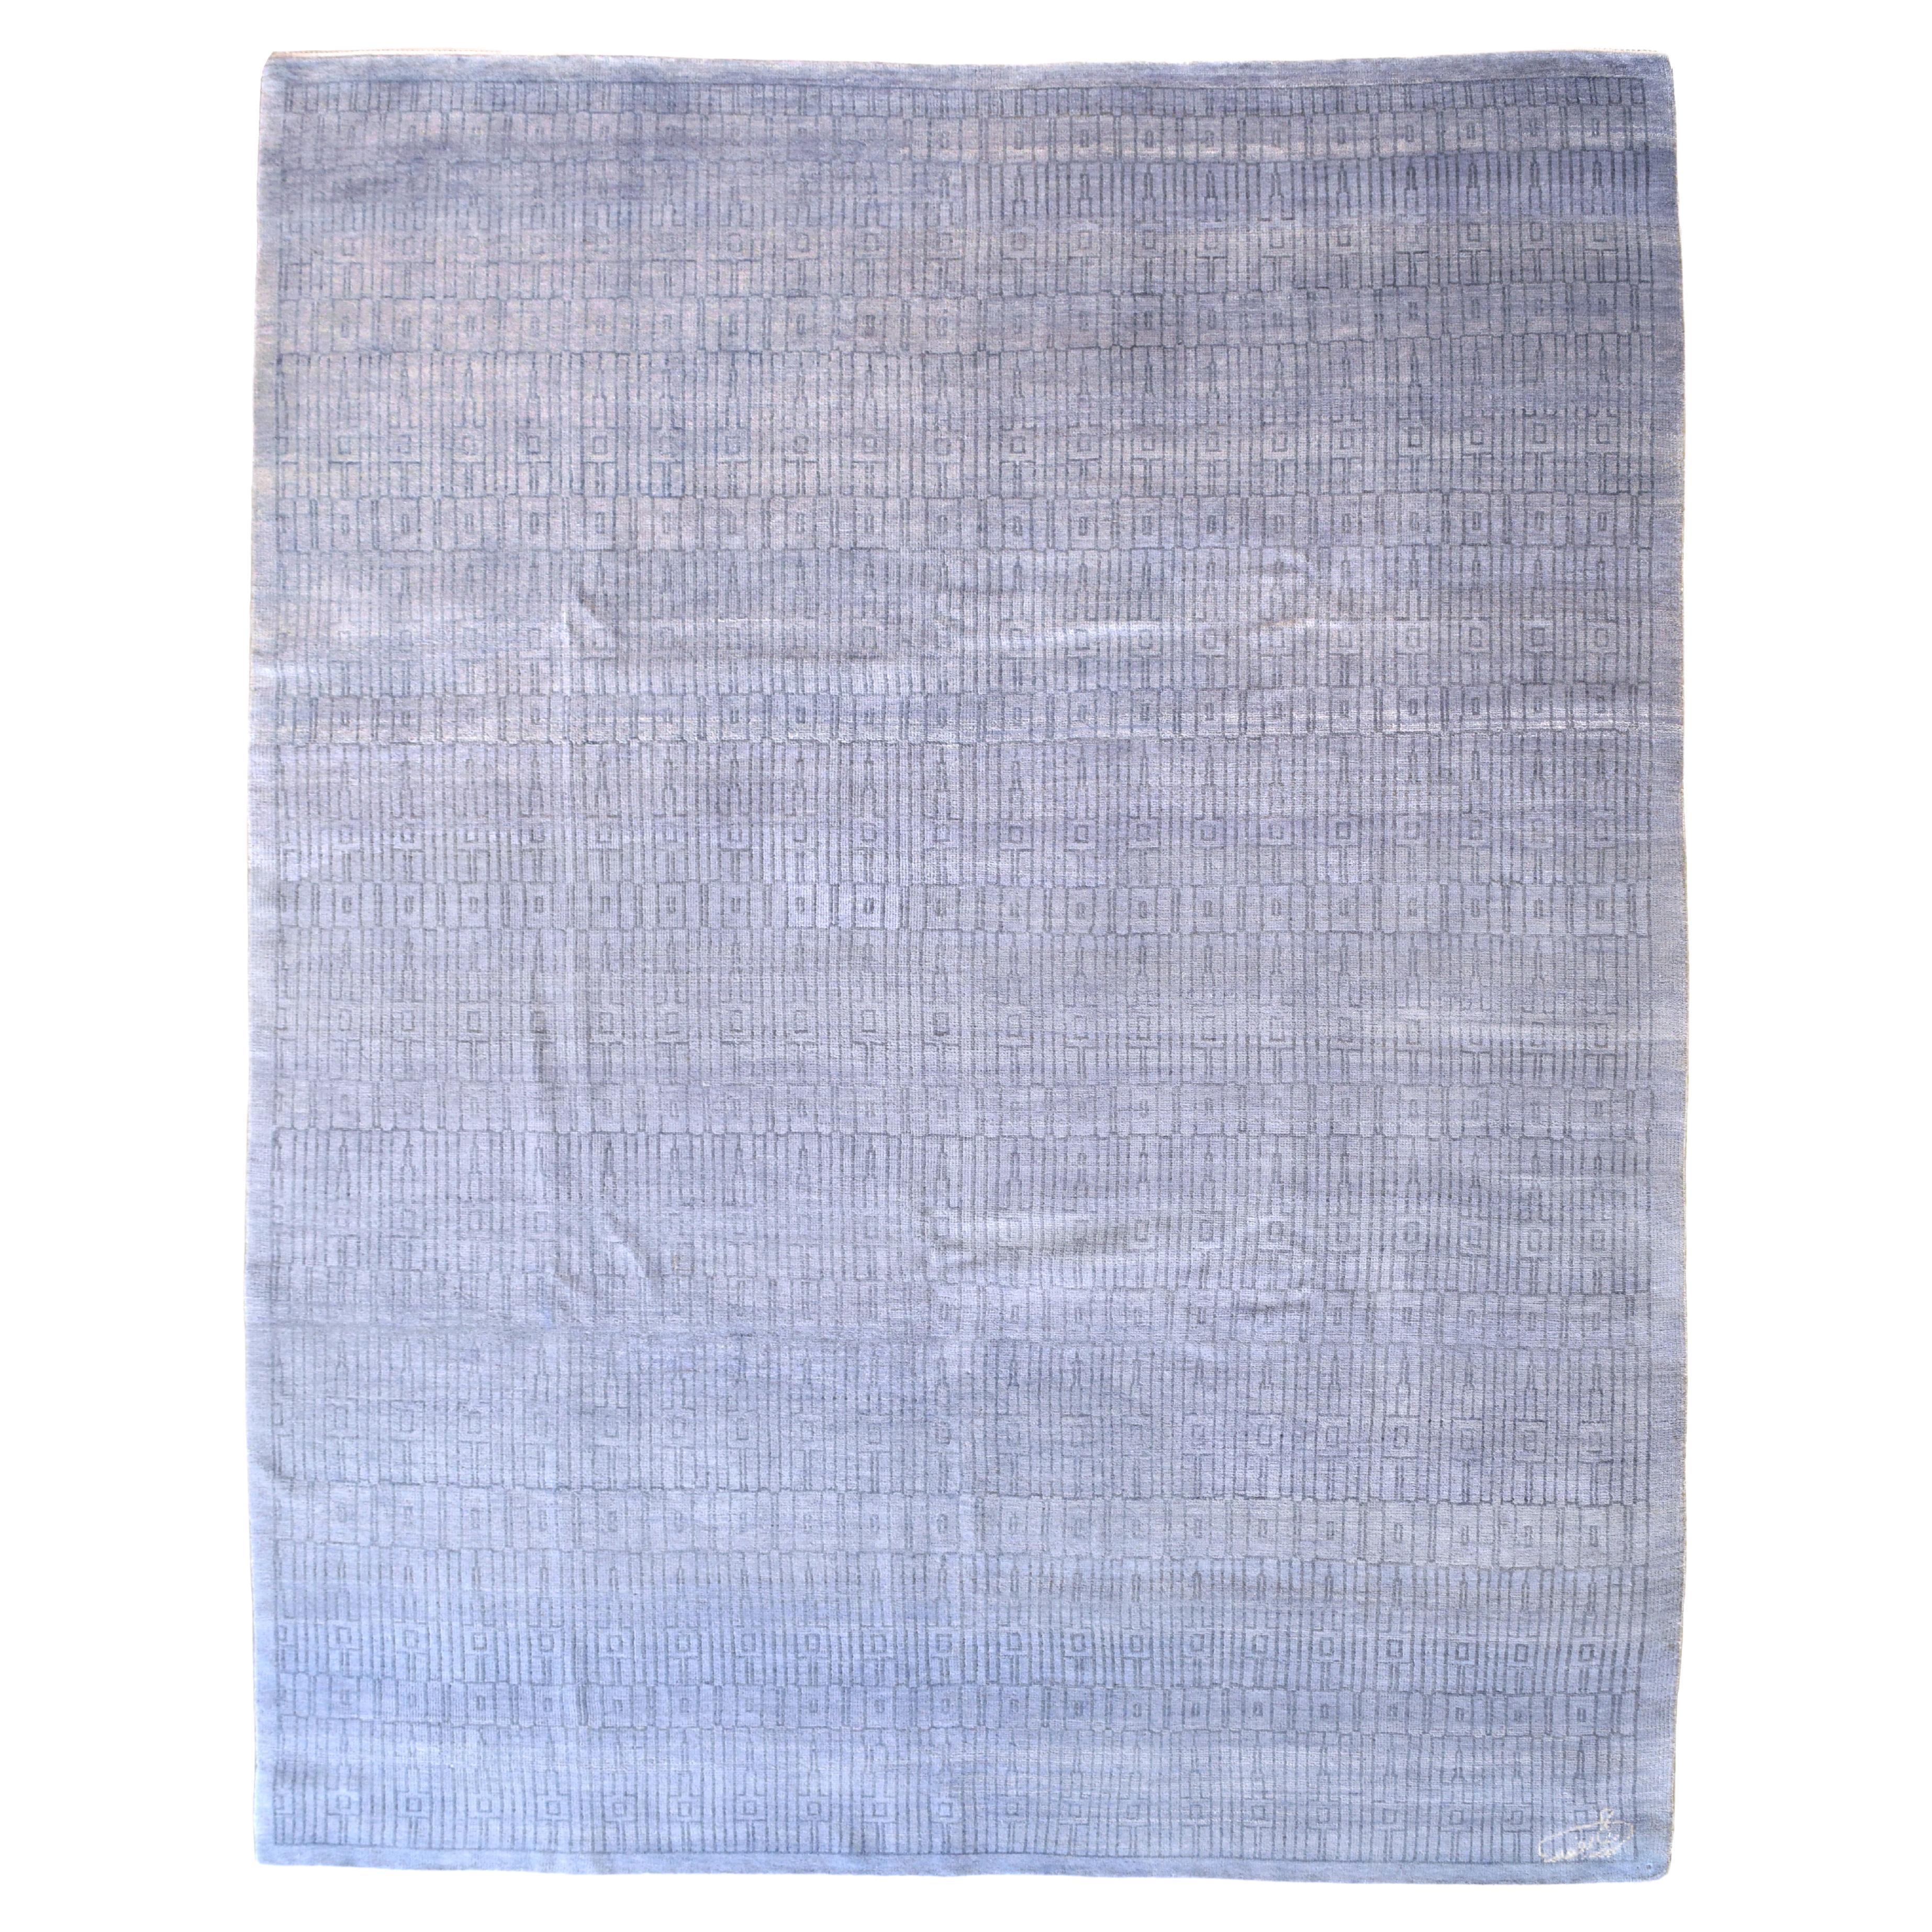 Blue and Gray Tone on Tone Geometric "Excelsior" Area Rug in Pure Wool, 8x10